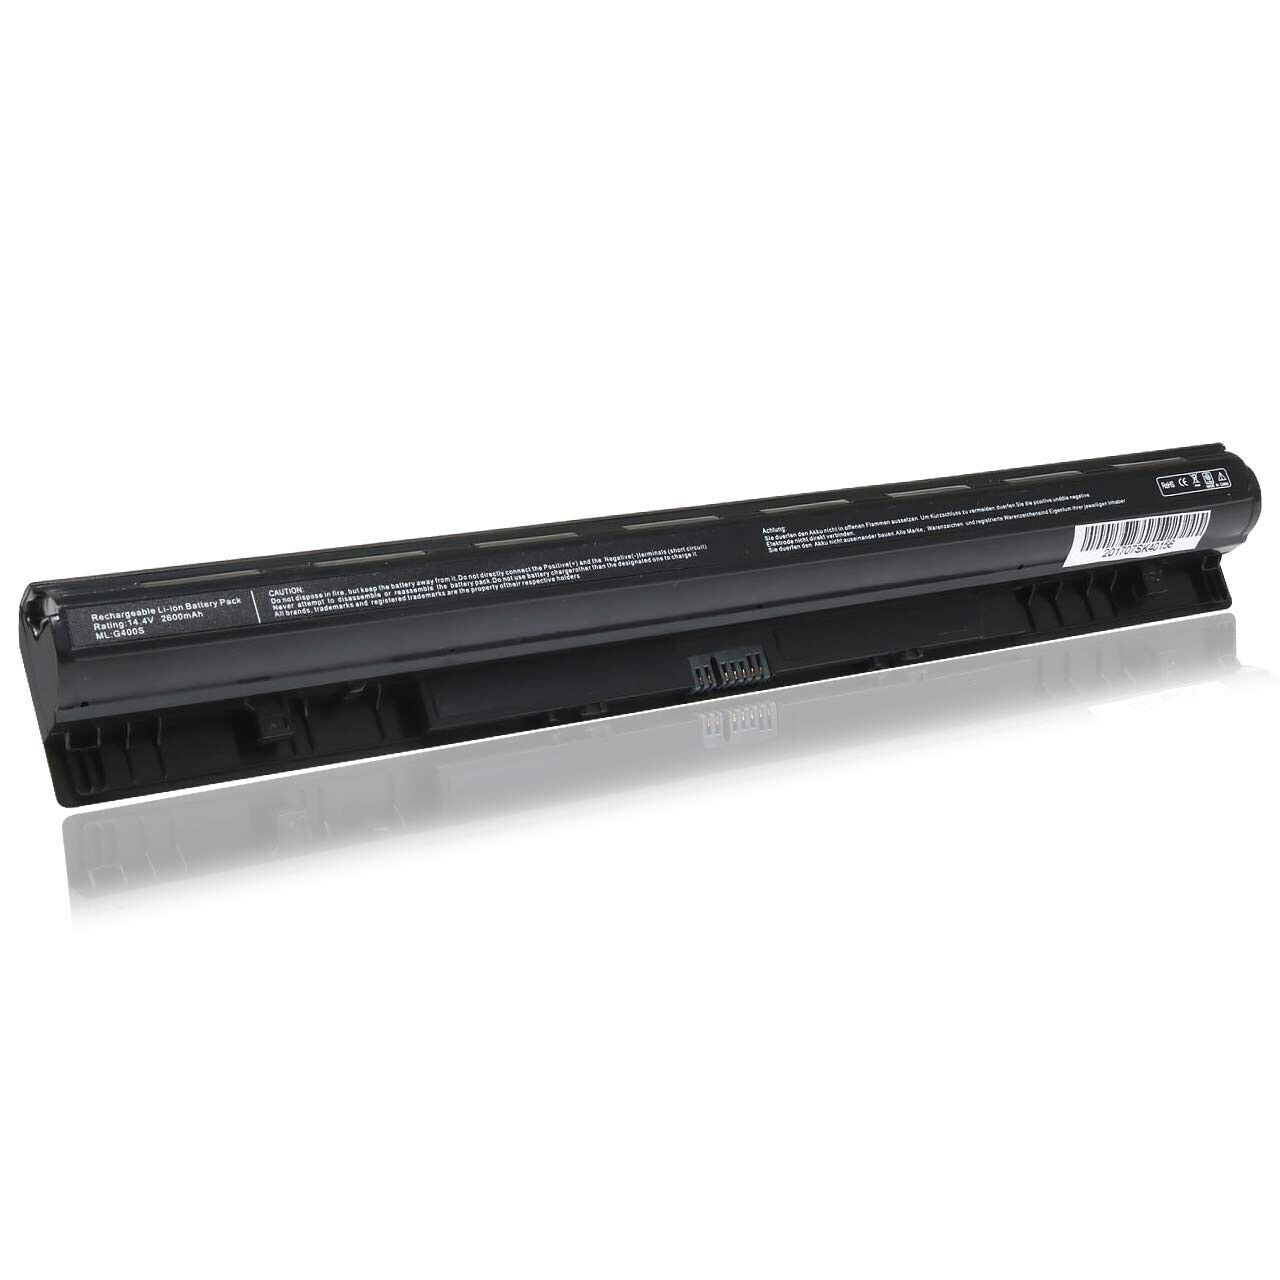 G400S G500S Laptop Battery Replacement For Lenovo G40 G50 Z40 IdeaPad L12L4A02